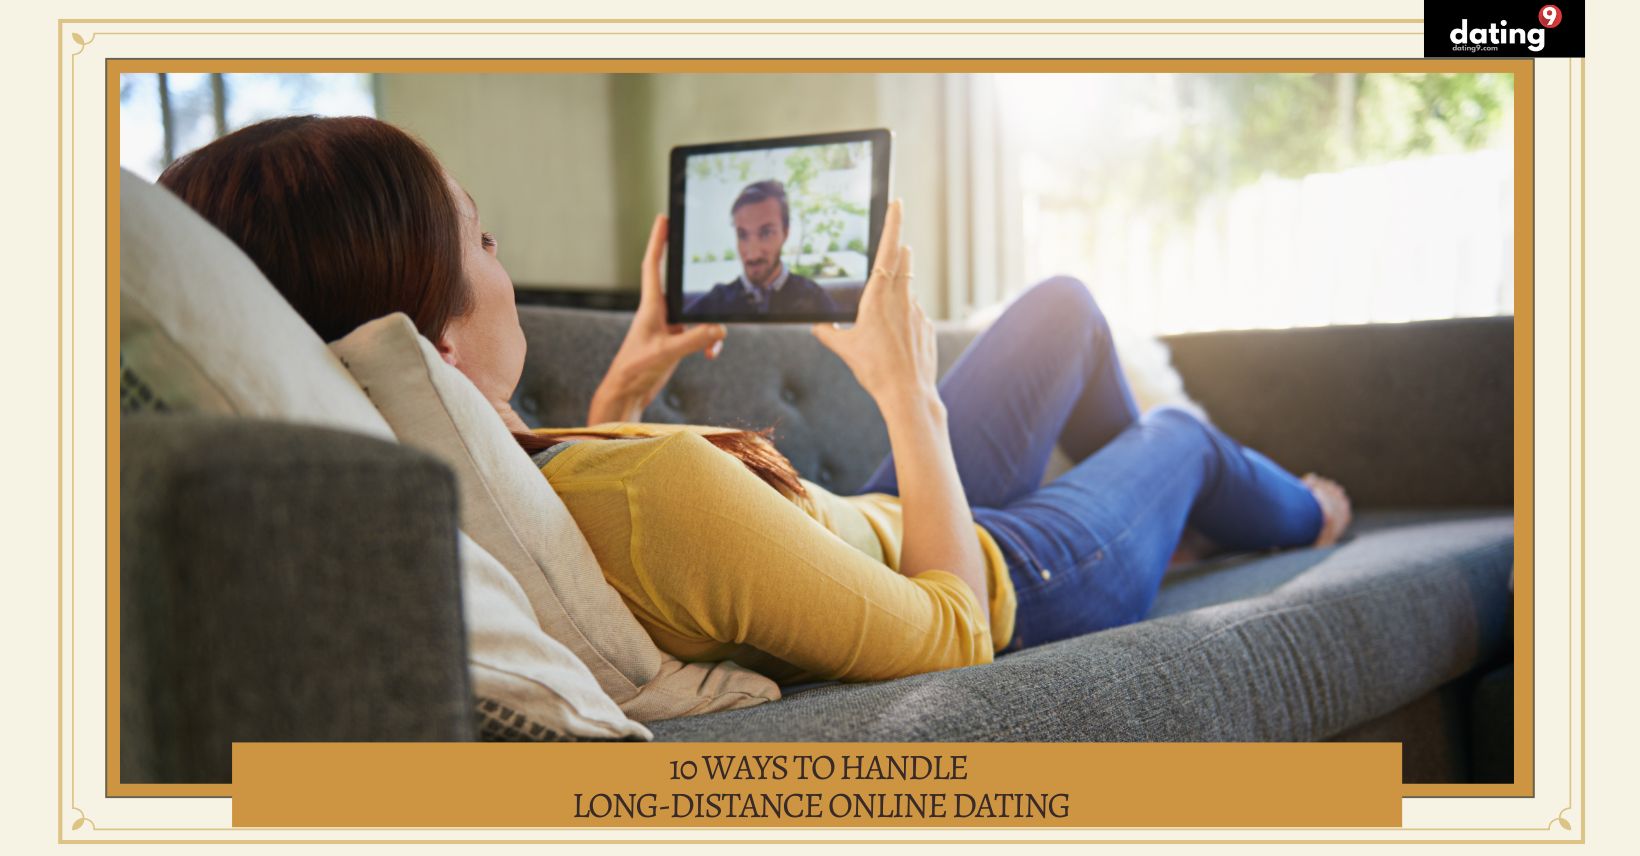 10 Ways to Handle Long-Distance Online Dating